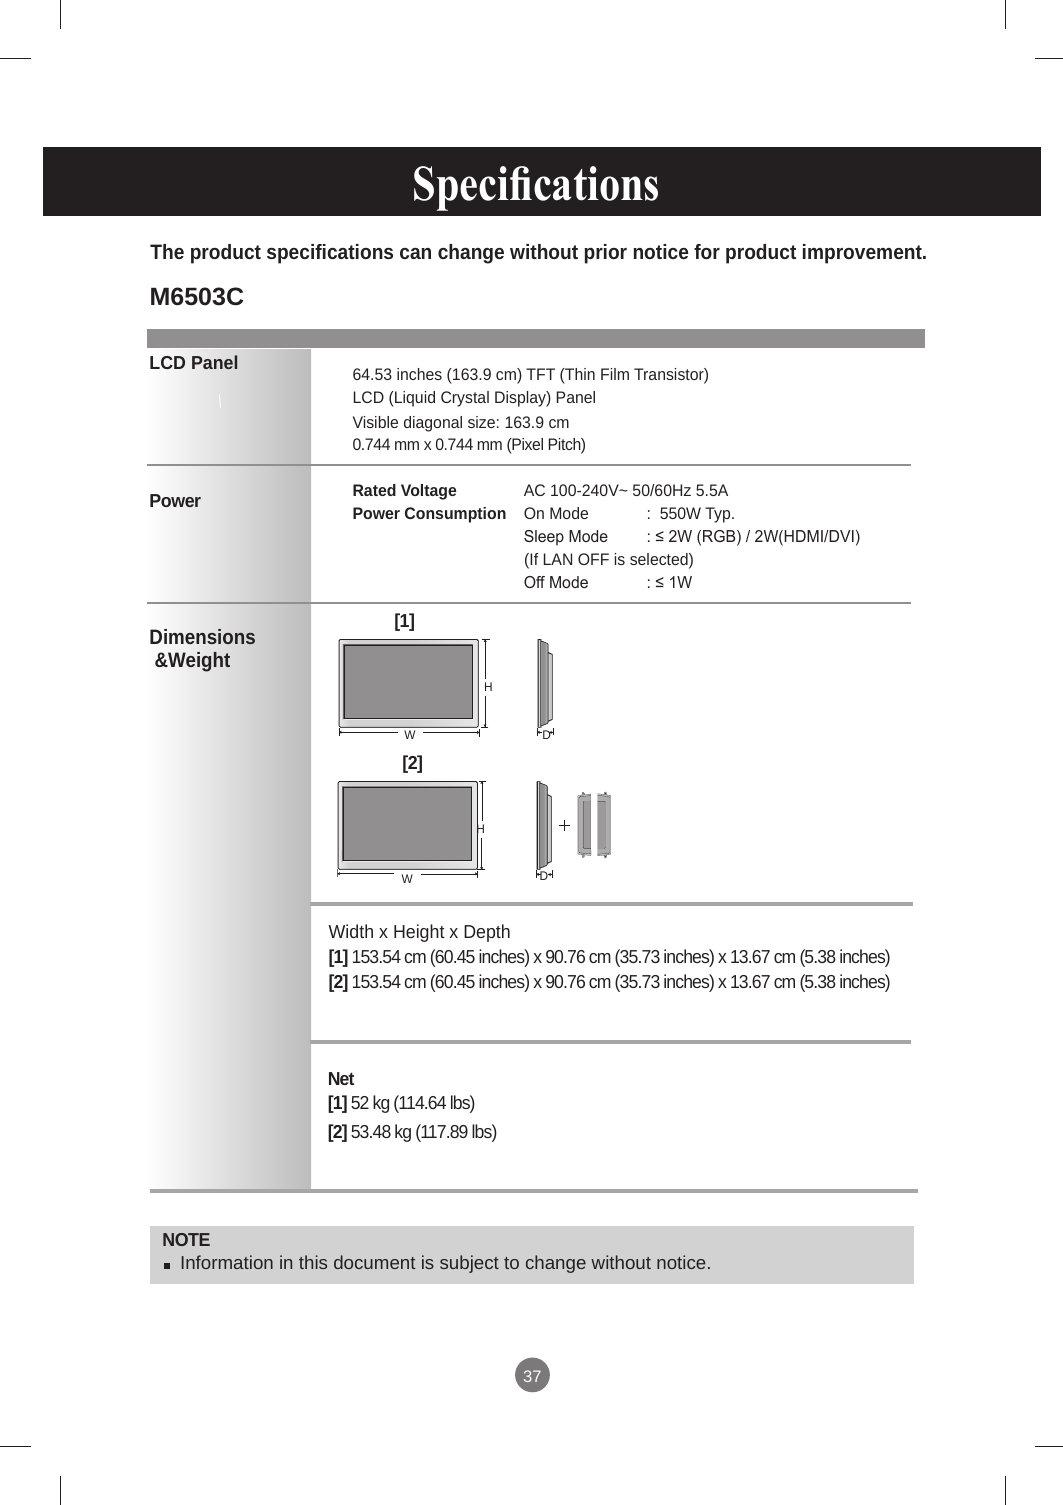 37LCD PanelPower Dimensions &amp;WeightNOTE Information in this document is subject to change without notice.64.53 inches (163.9 cm) TFT (Thin Film Transistor) LCD (Liquid Crystal Display) PanelVisible diagonal size: 163.9 cm0.744 mm x 0.744 mm (Pixel Pitch)Rated Voltage   AC 100-240V~ 50/60Hz 5.5APower Consumption  On Mode  :  550W Typ.   Sleep Mode  : ≤ 2W (RGB) / 2W(HDMI/DVI)                                       (If LAN OFF is selected)   Off Mode  : ≤ 1W The product specifications can change without prior notice for product improvement.Width x Height x Depth  [1] 153.54 cm (60.45 inches) x 90.76 cm (35.73 inches) x 13.67 cm (5.38 inches)[2] 153.54 cm (60.45 inches) x 90.76 cm (35.73 inches) x 13.67 cm (5.38 inches)Net   [1] 52 kg (114.64 lbs) [2] 53.48 kg (117.89 lbs)[1] [2] WHDDWH Specications  M6503C